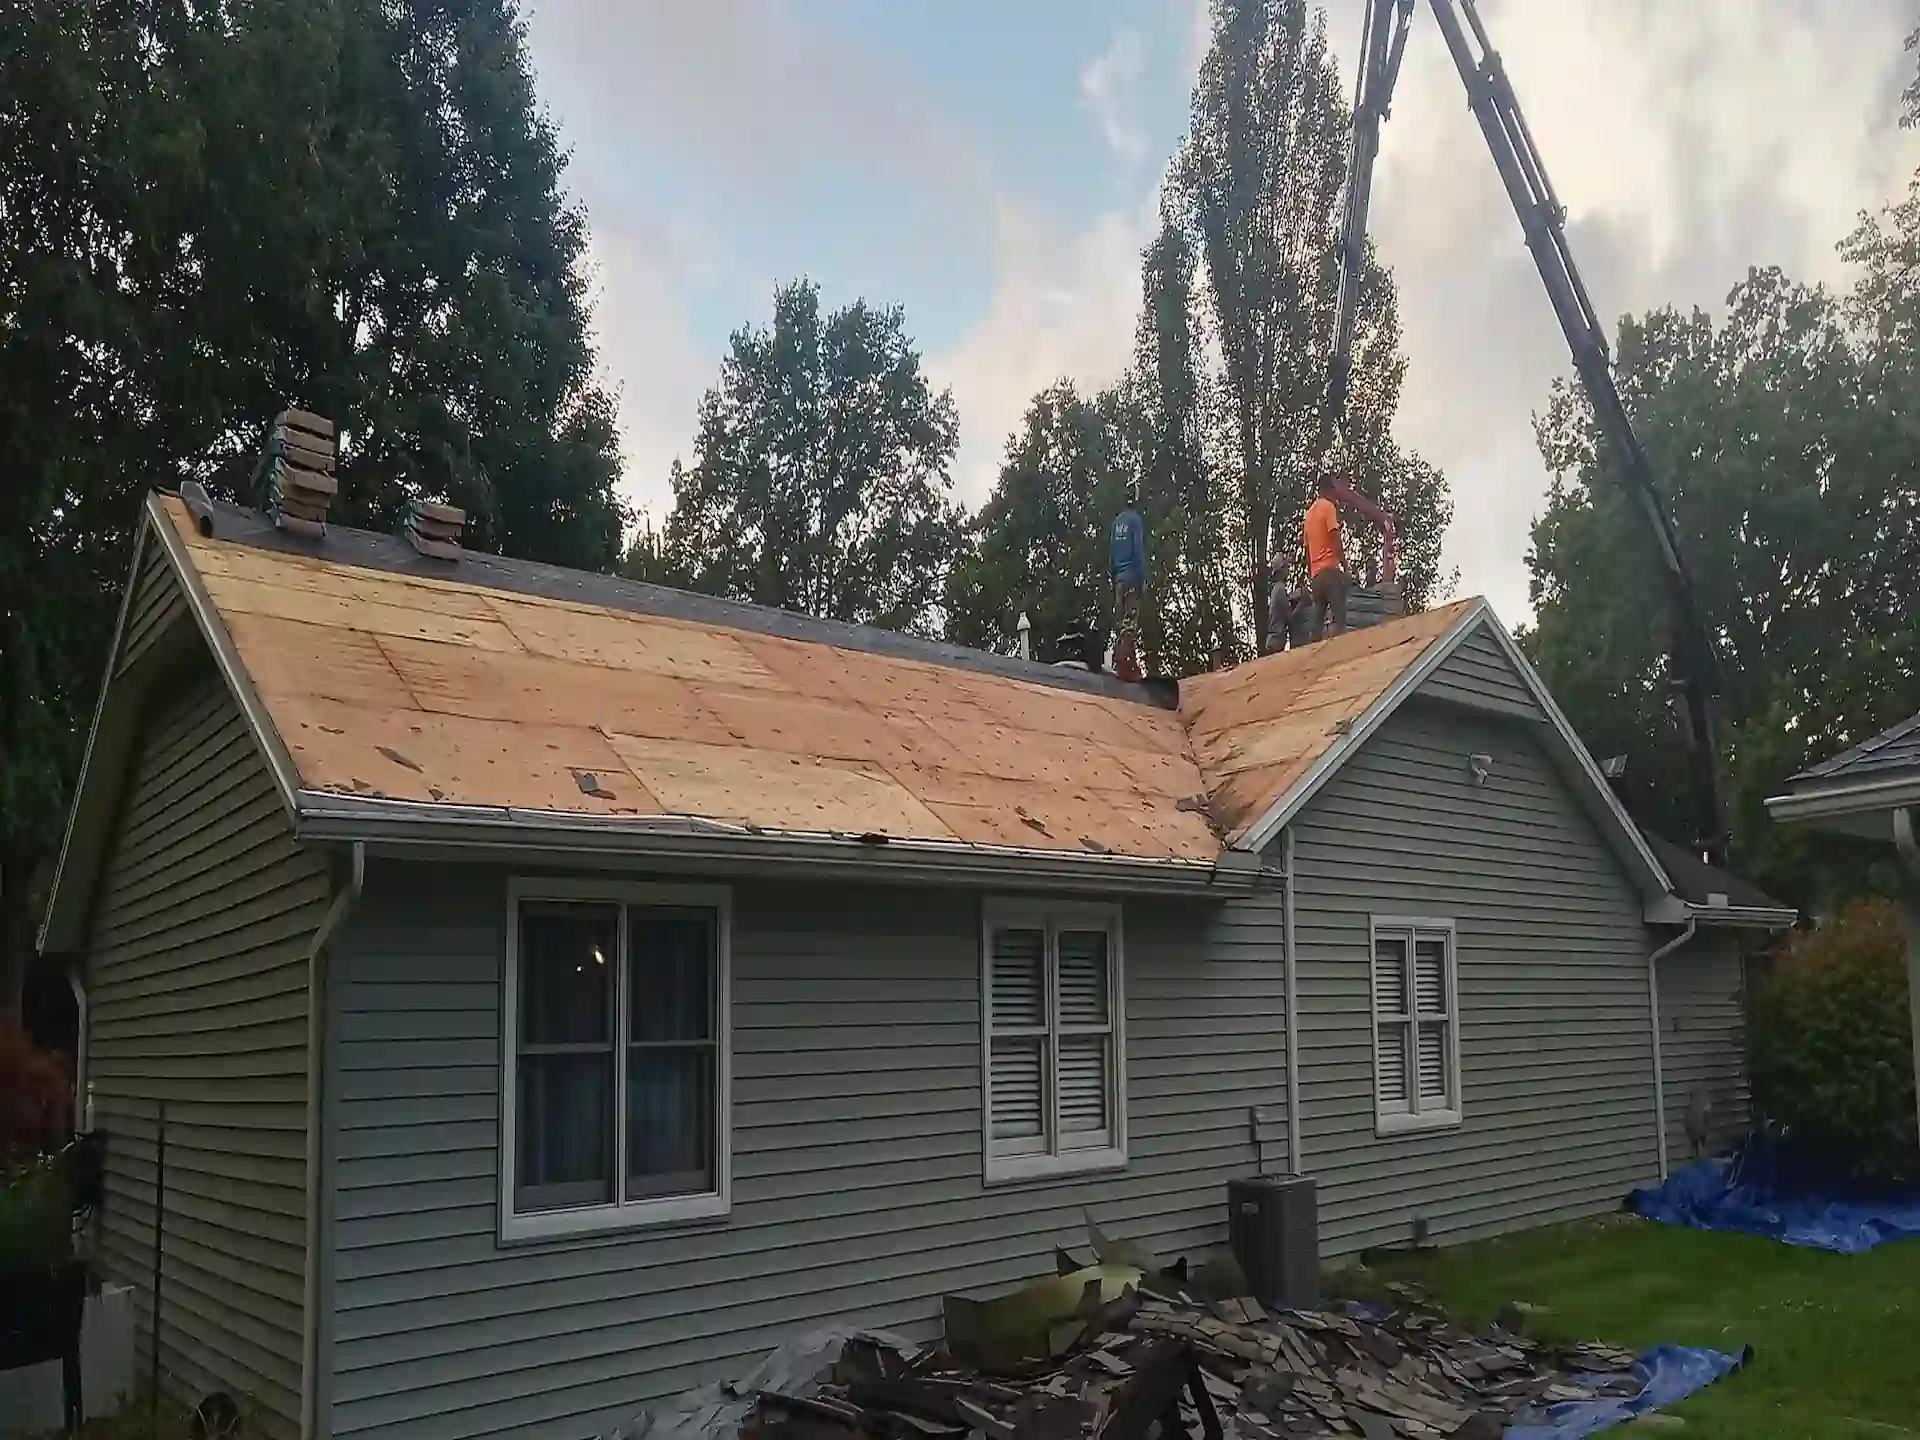 roofers working on new roof with shingles not yet on